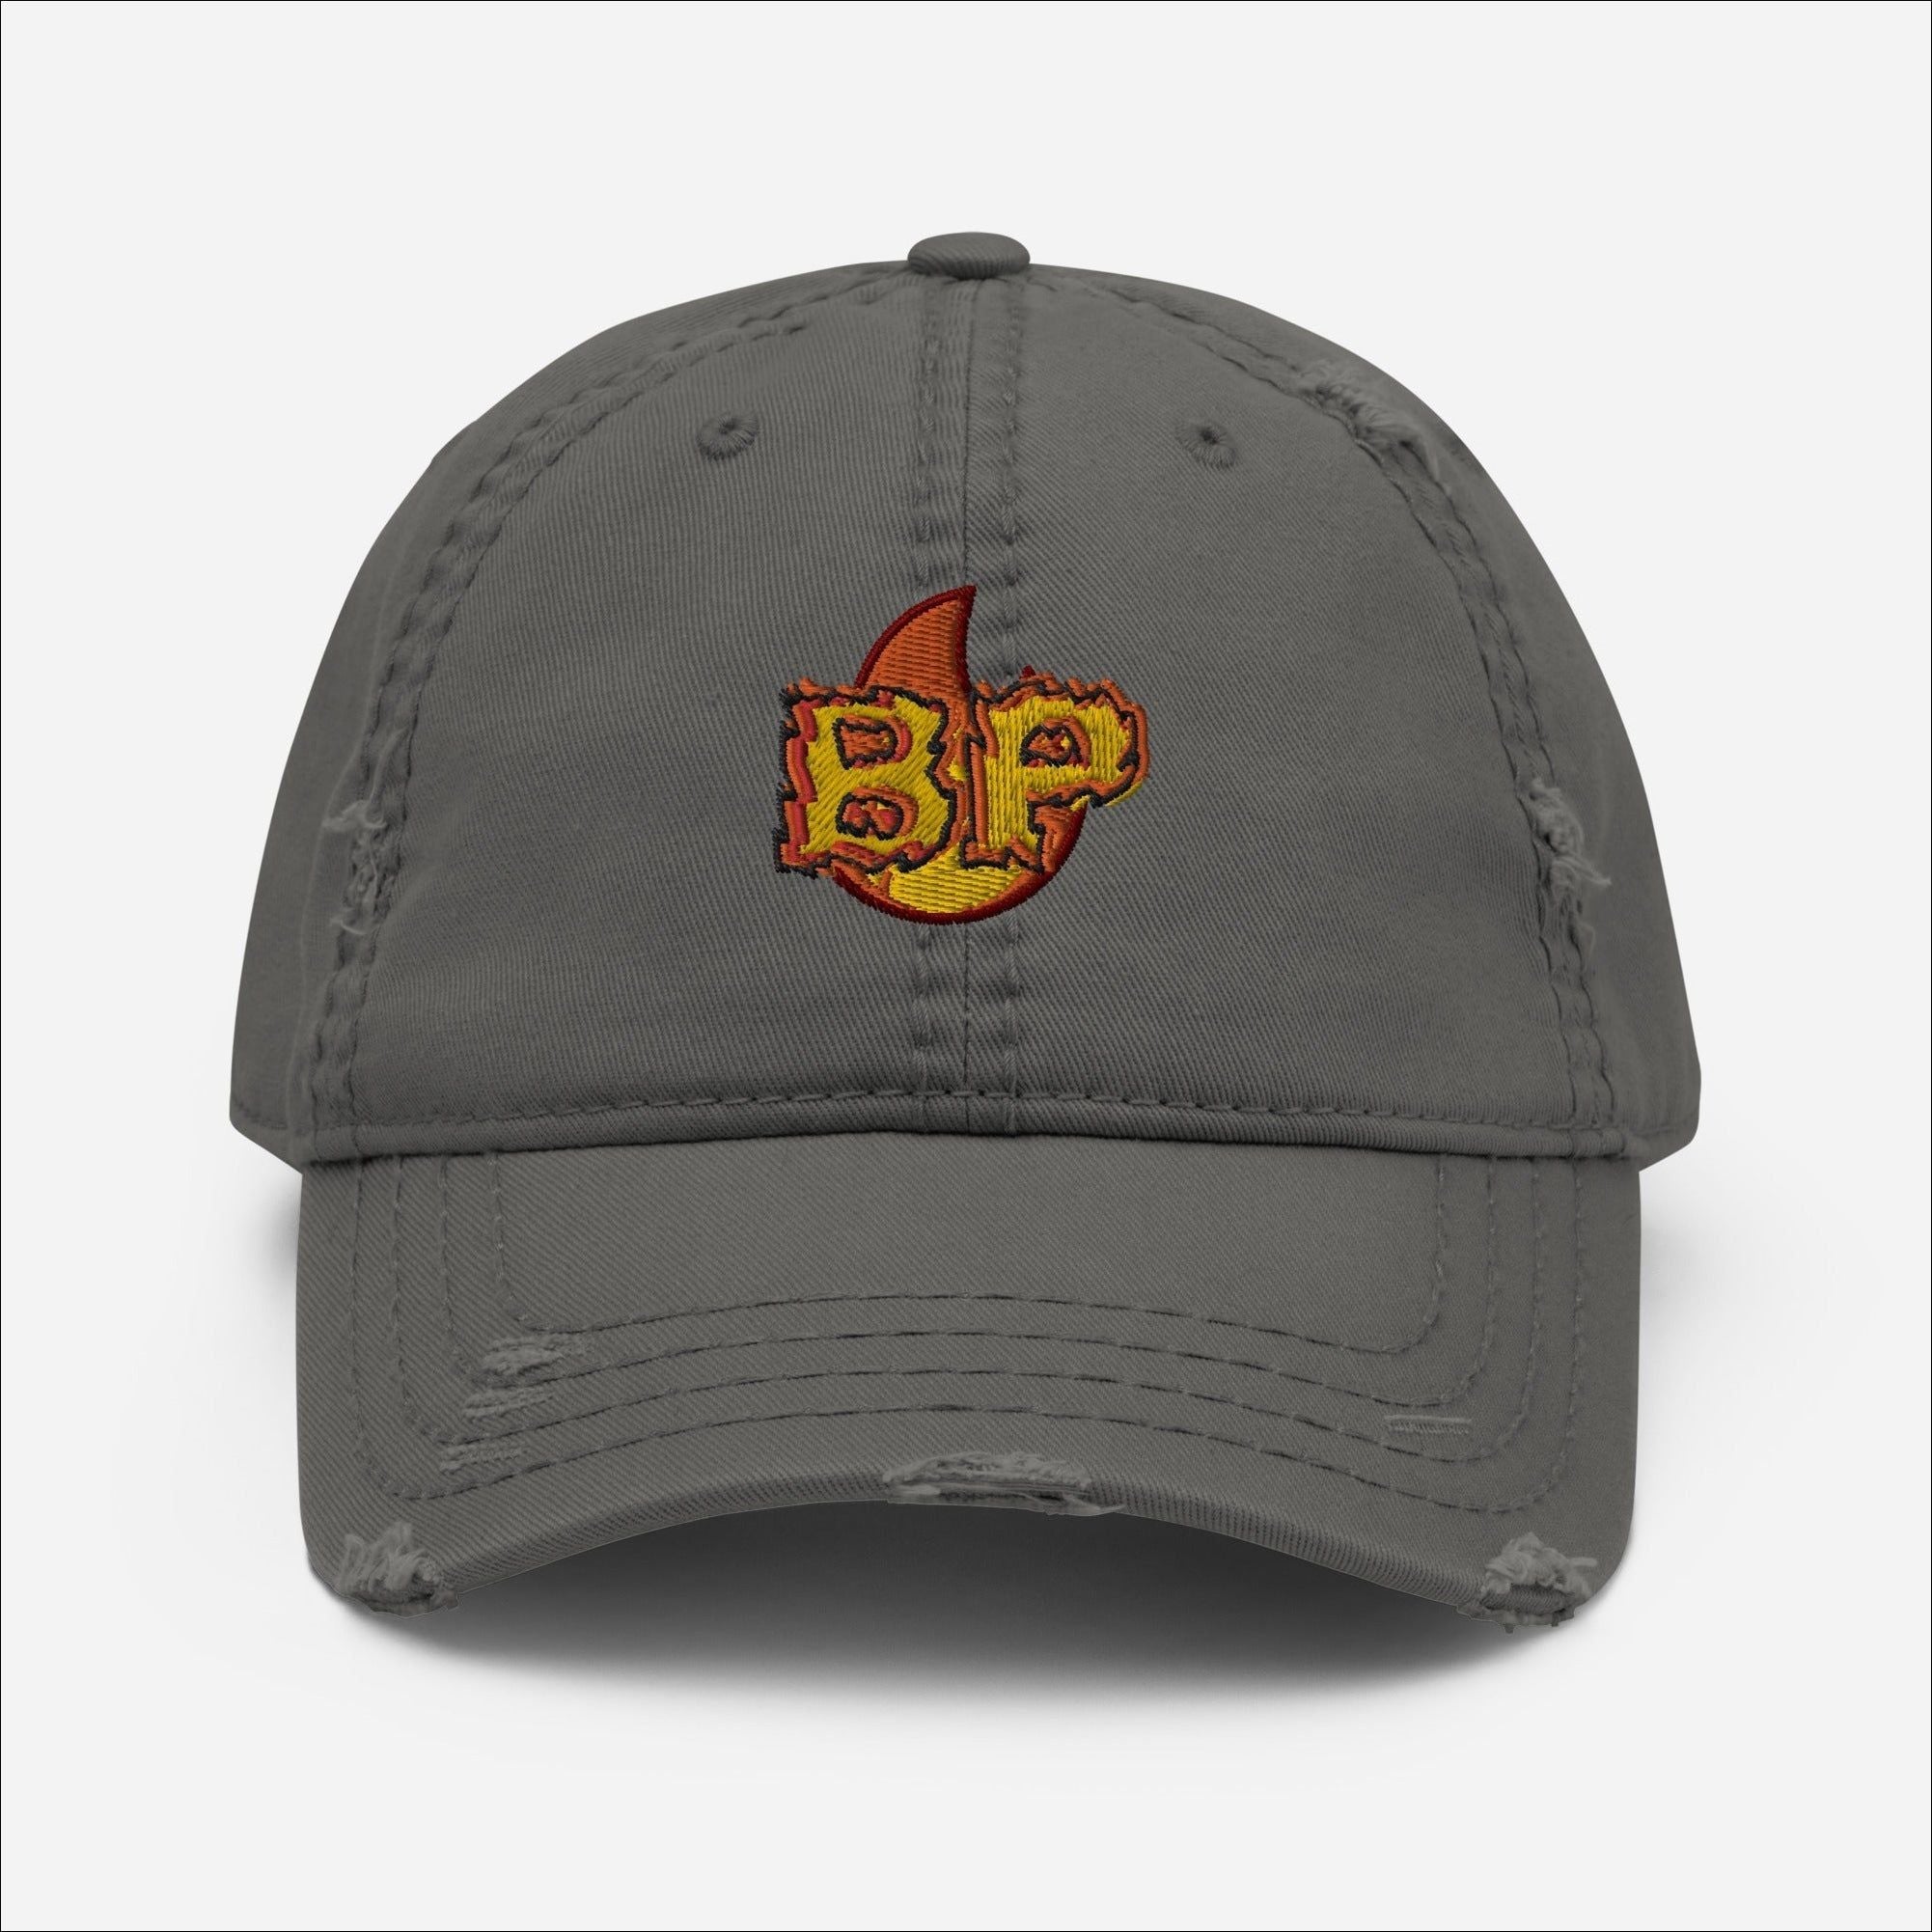 Fuel Your Fire Dad Hat - Bad Product